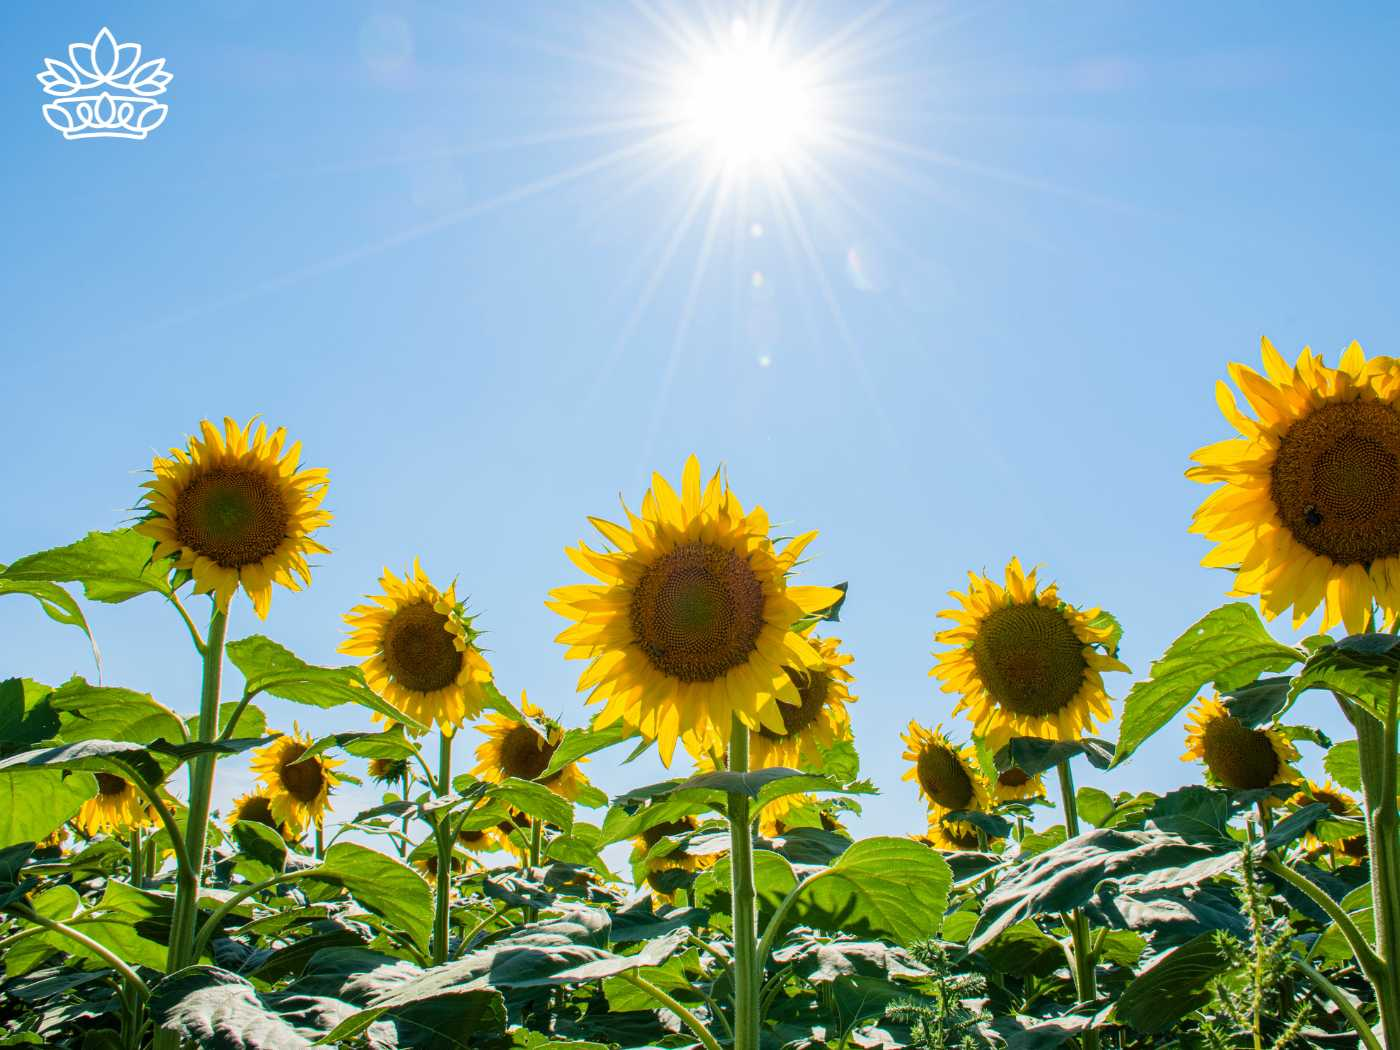 Radiant yellow sunflowers standing tall under the bright sun against a clear blue sky, part of the Sunflowers Collection by Fabulous Flowers and Gifts. These sunflower bouquets bring a page of summer vibrancy and beauty to any environment.